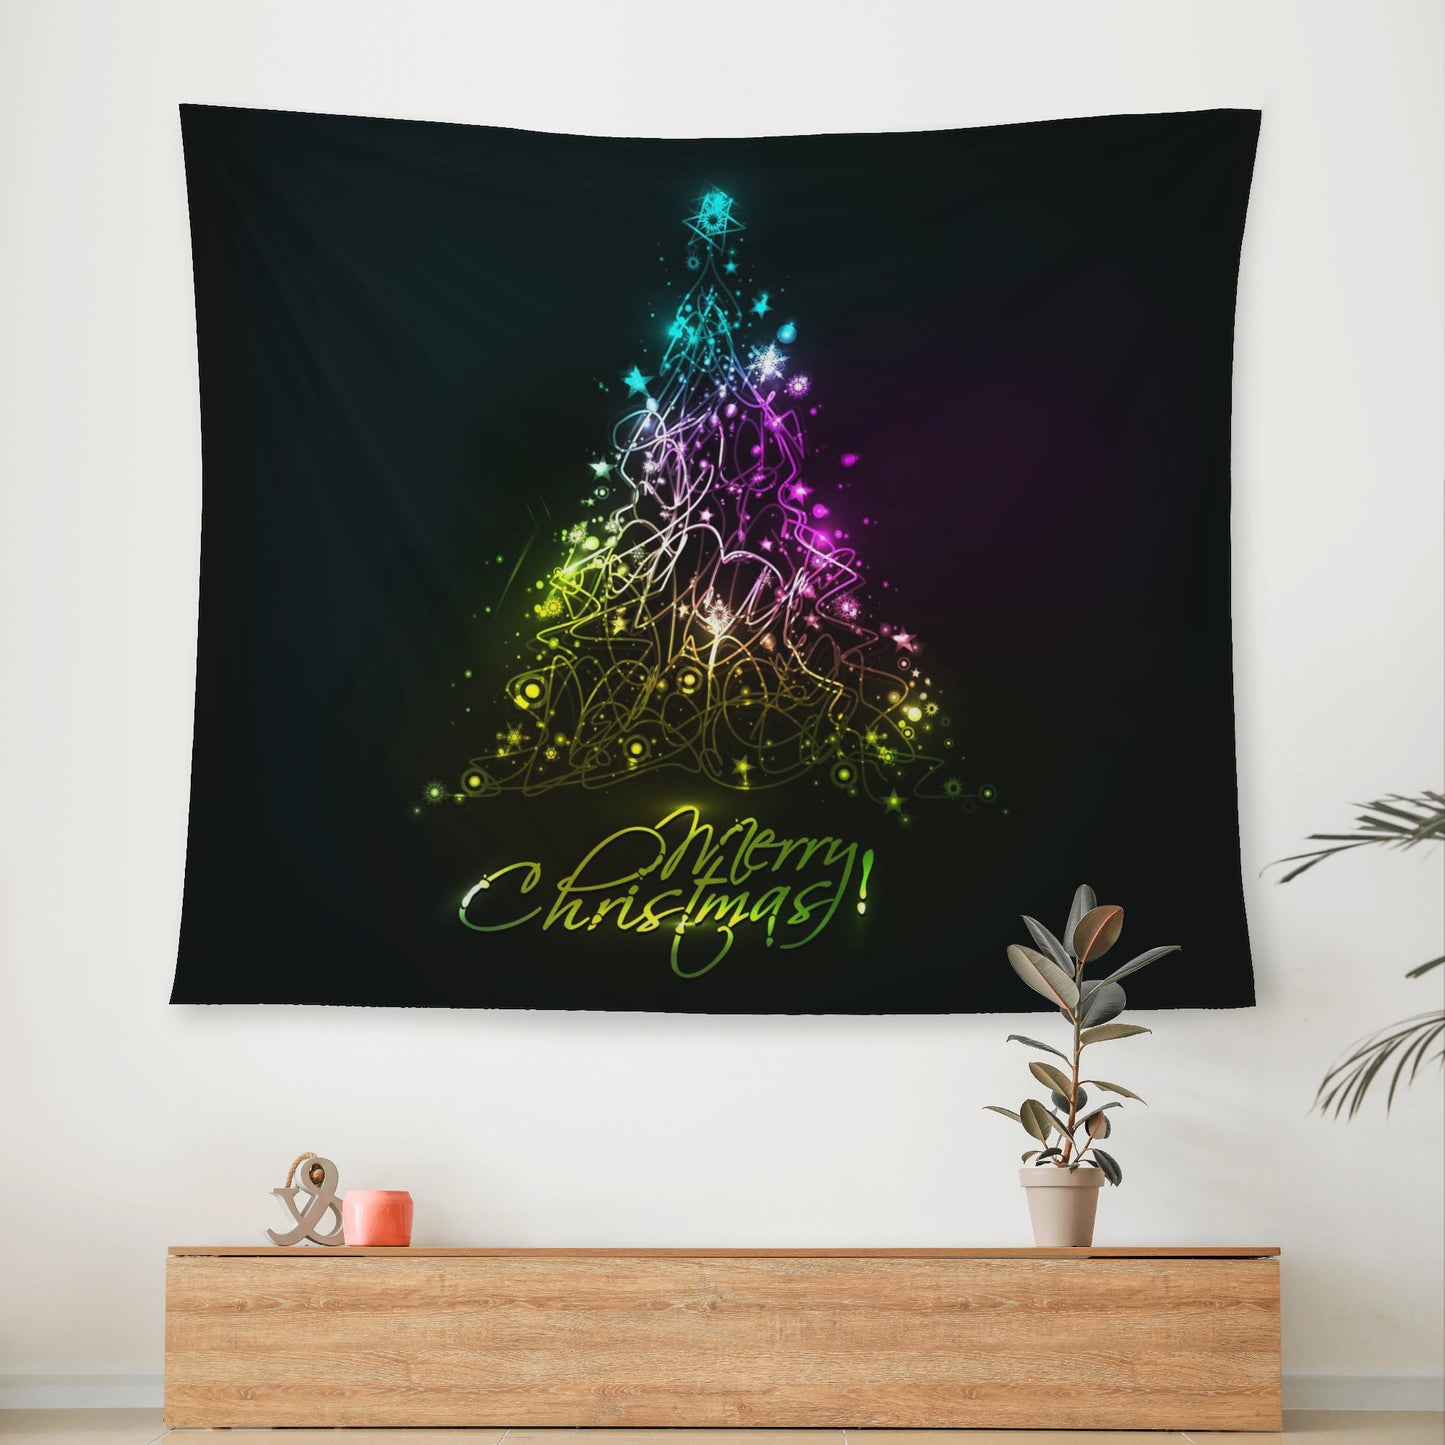 Stunning Addition to Any Home A Christmas Tree Delight Wall Tapestry